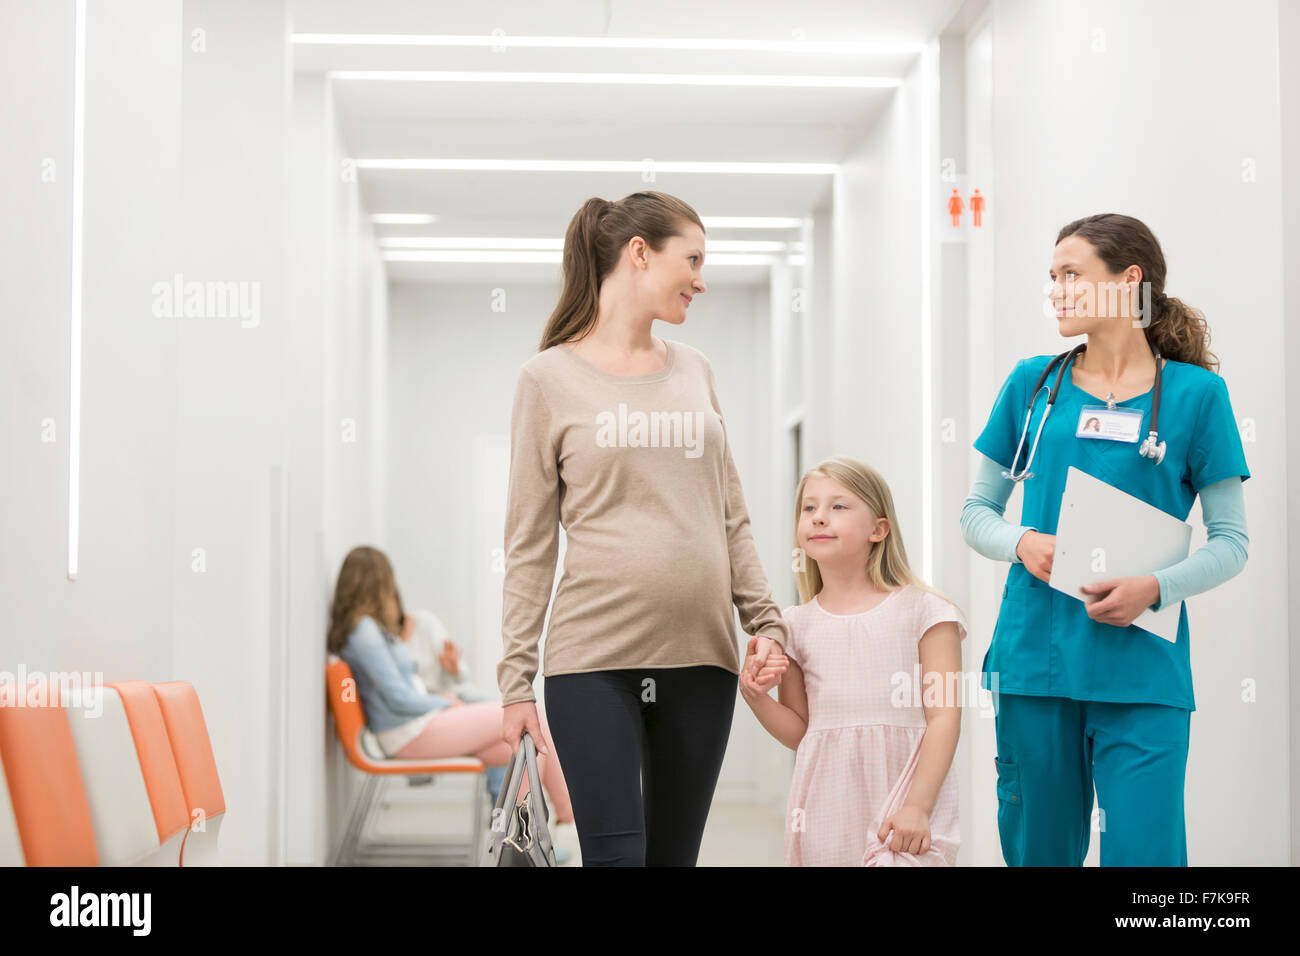 Nurse talking to mother and daughter in hospital corridor Banque D'Images